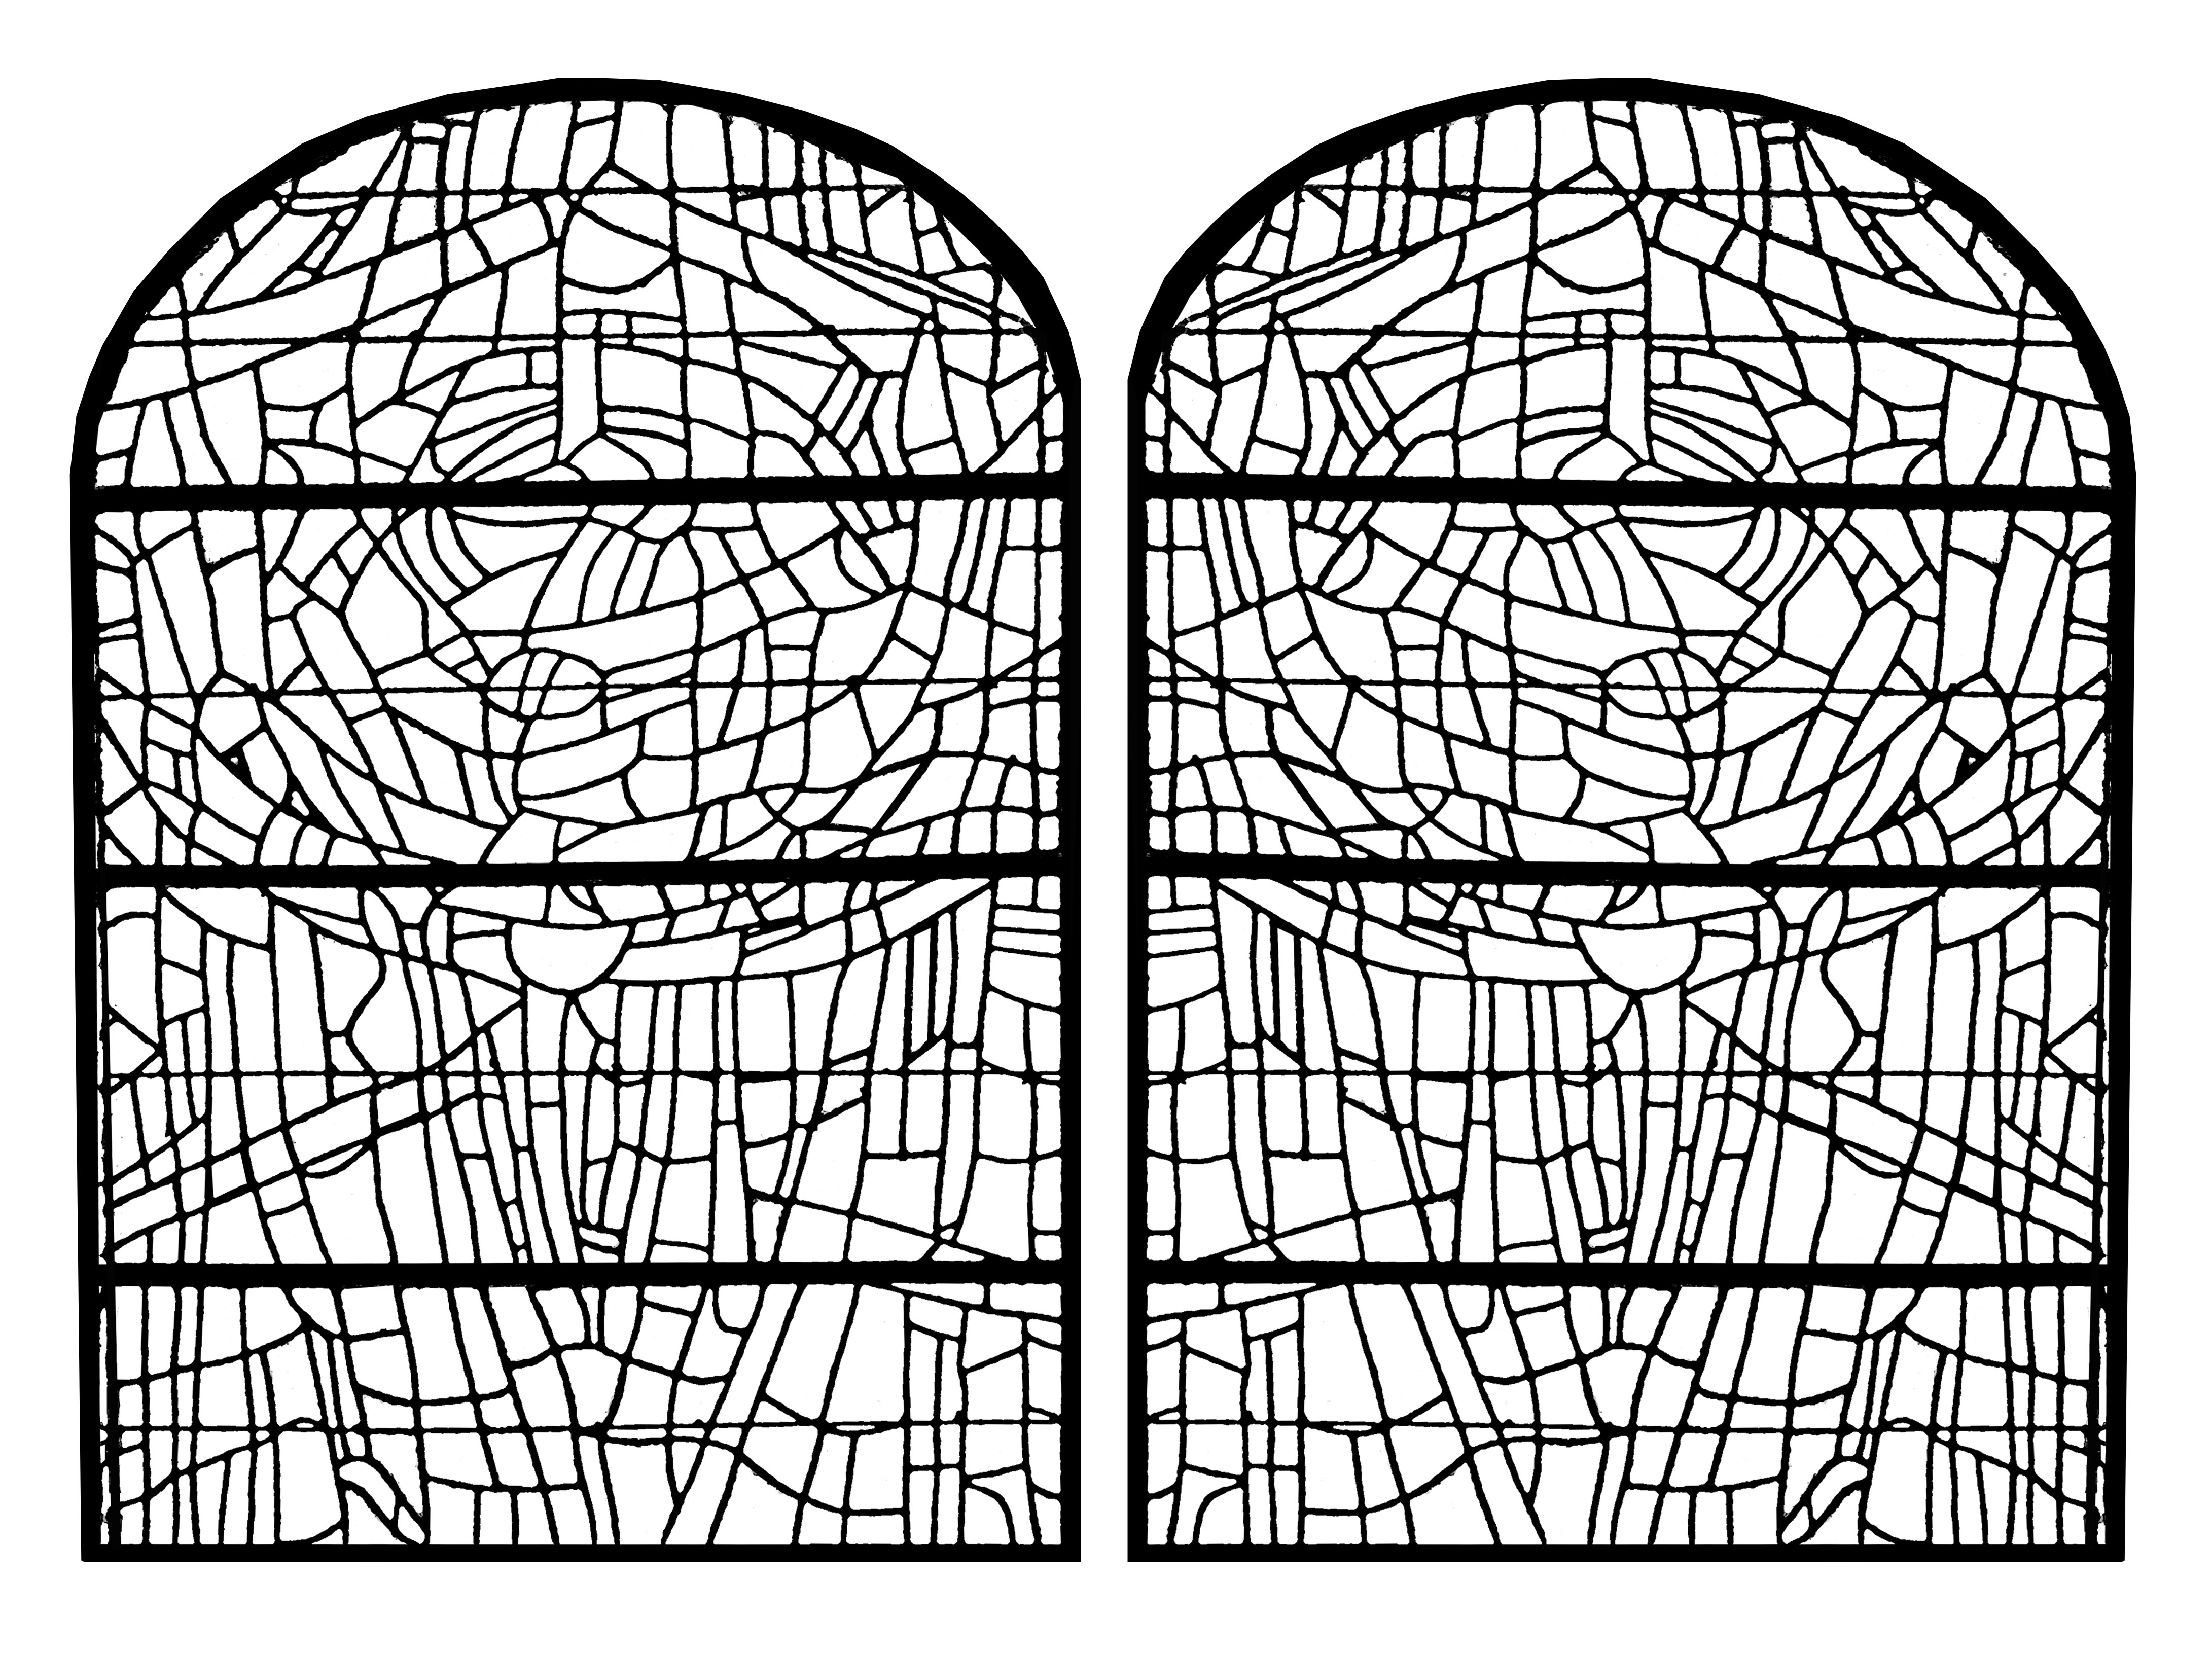 Coloring page made from a modern Stained glass from Saint Servant sur Oust Church (France) - version 2